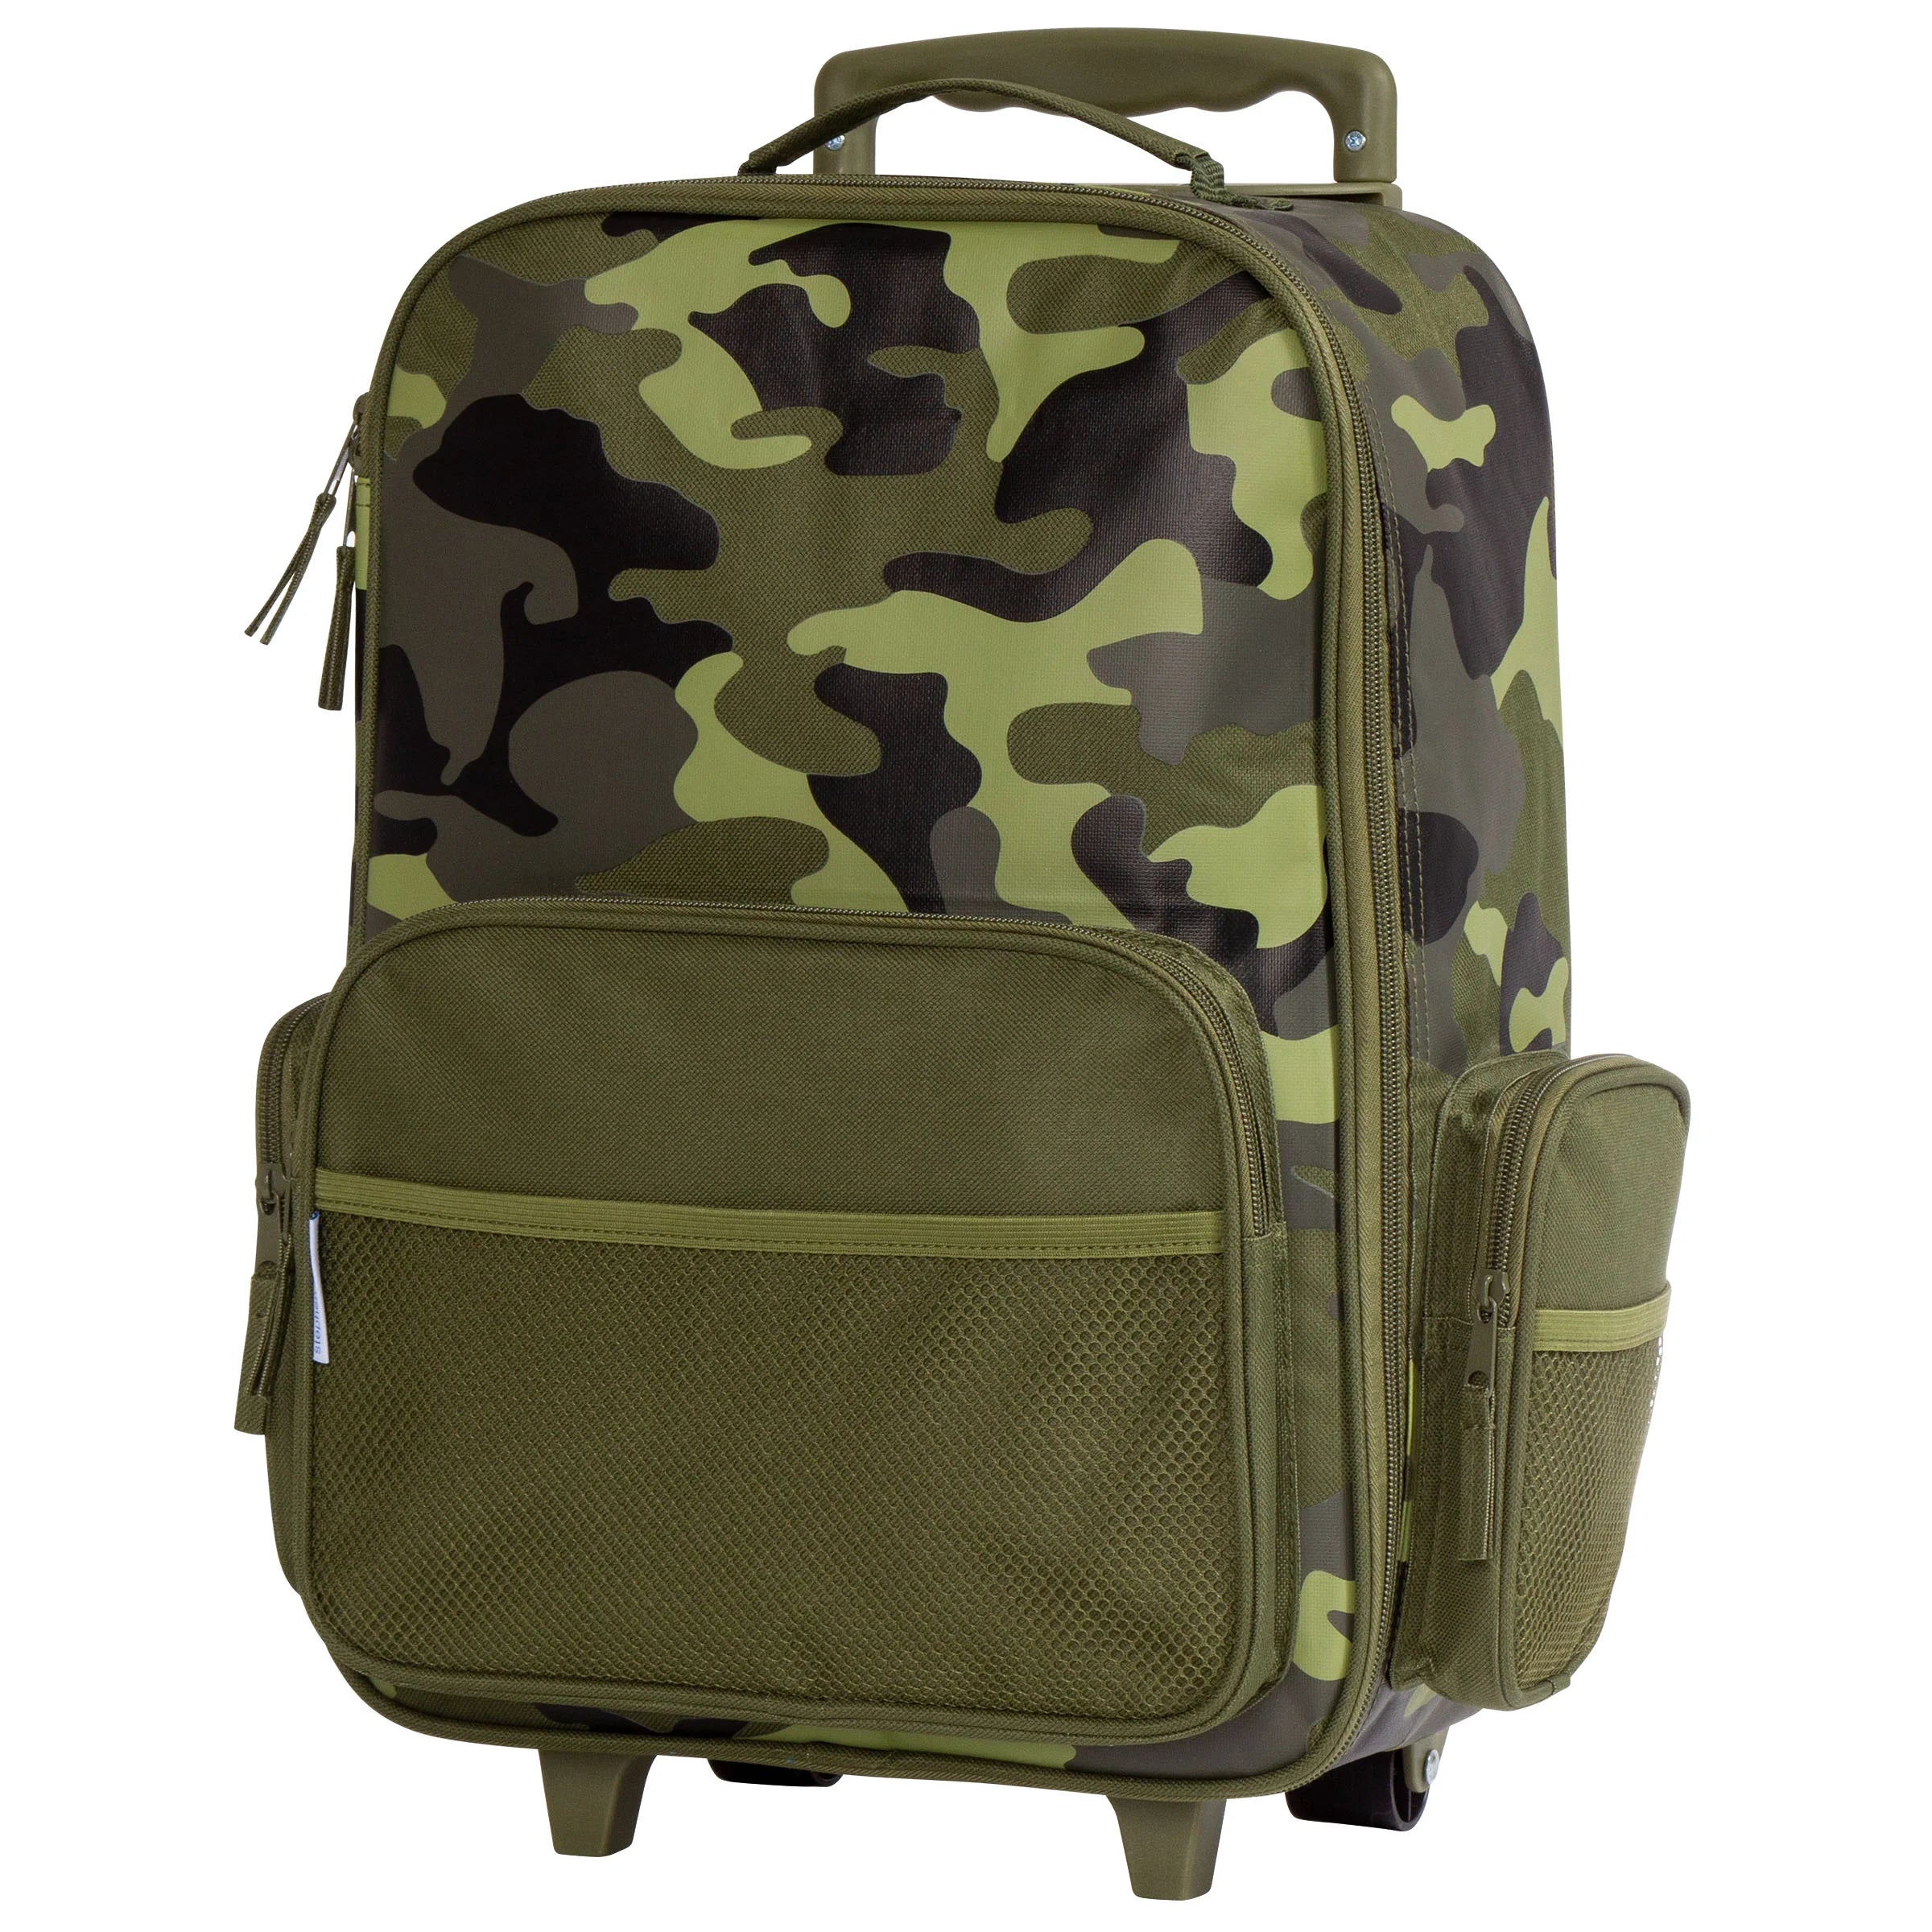 Personalized Rolling Luggage - Camo